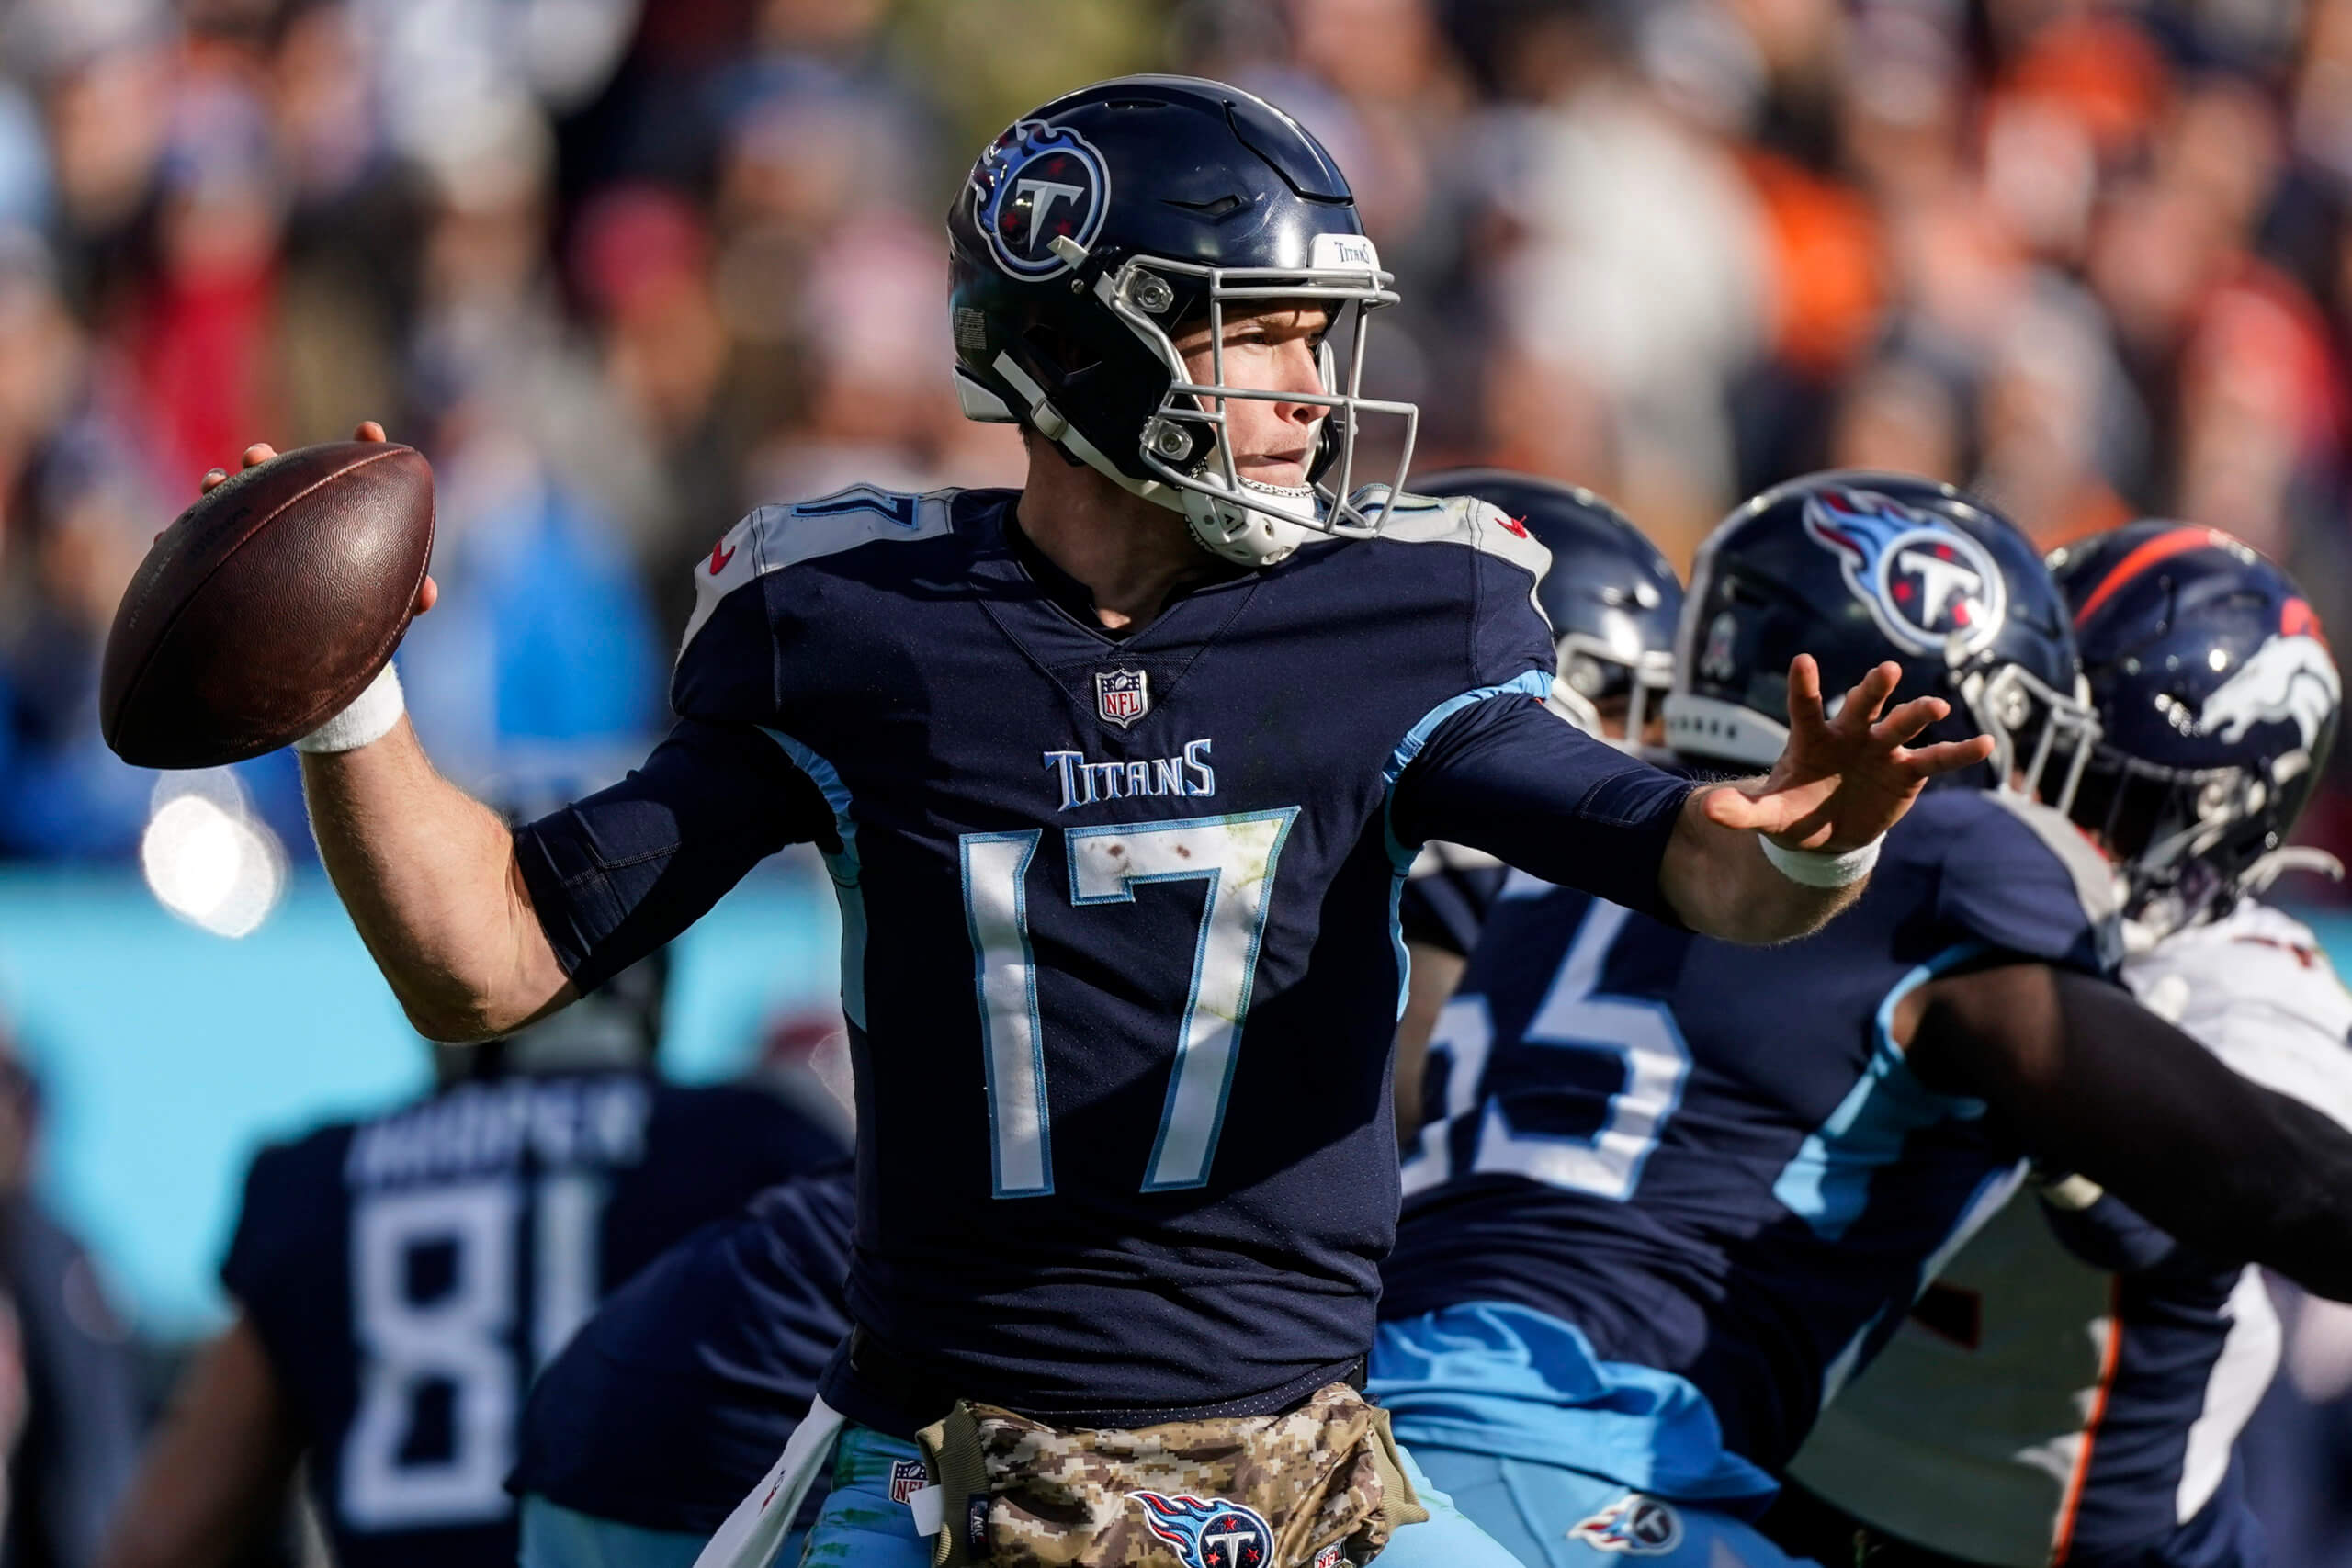 NFL Week 11 Titans vs Packers: Thursday Night Football preview